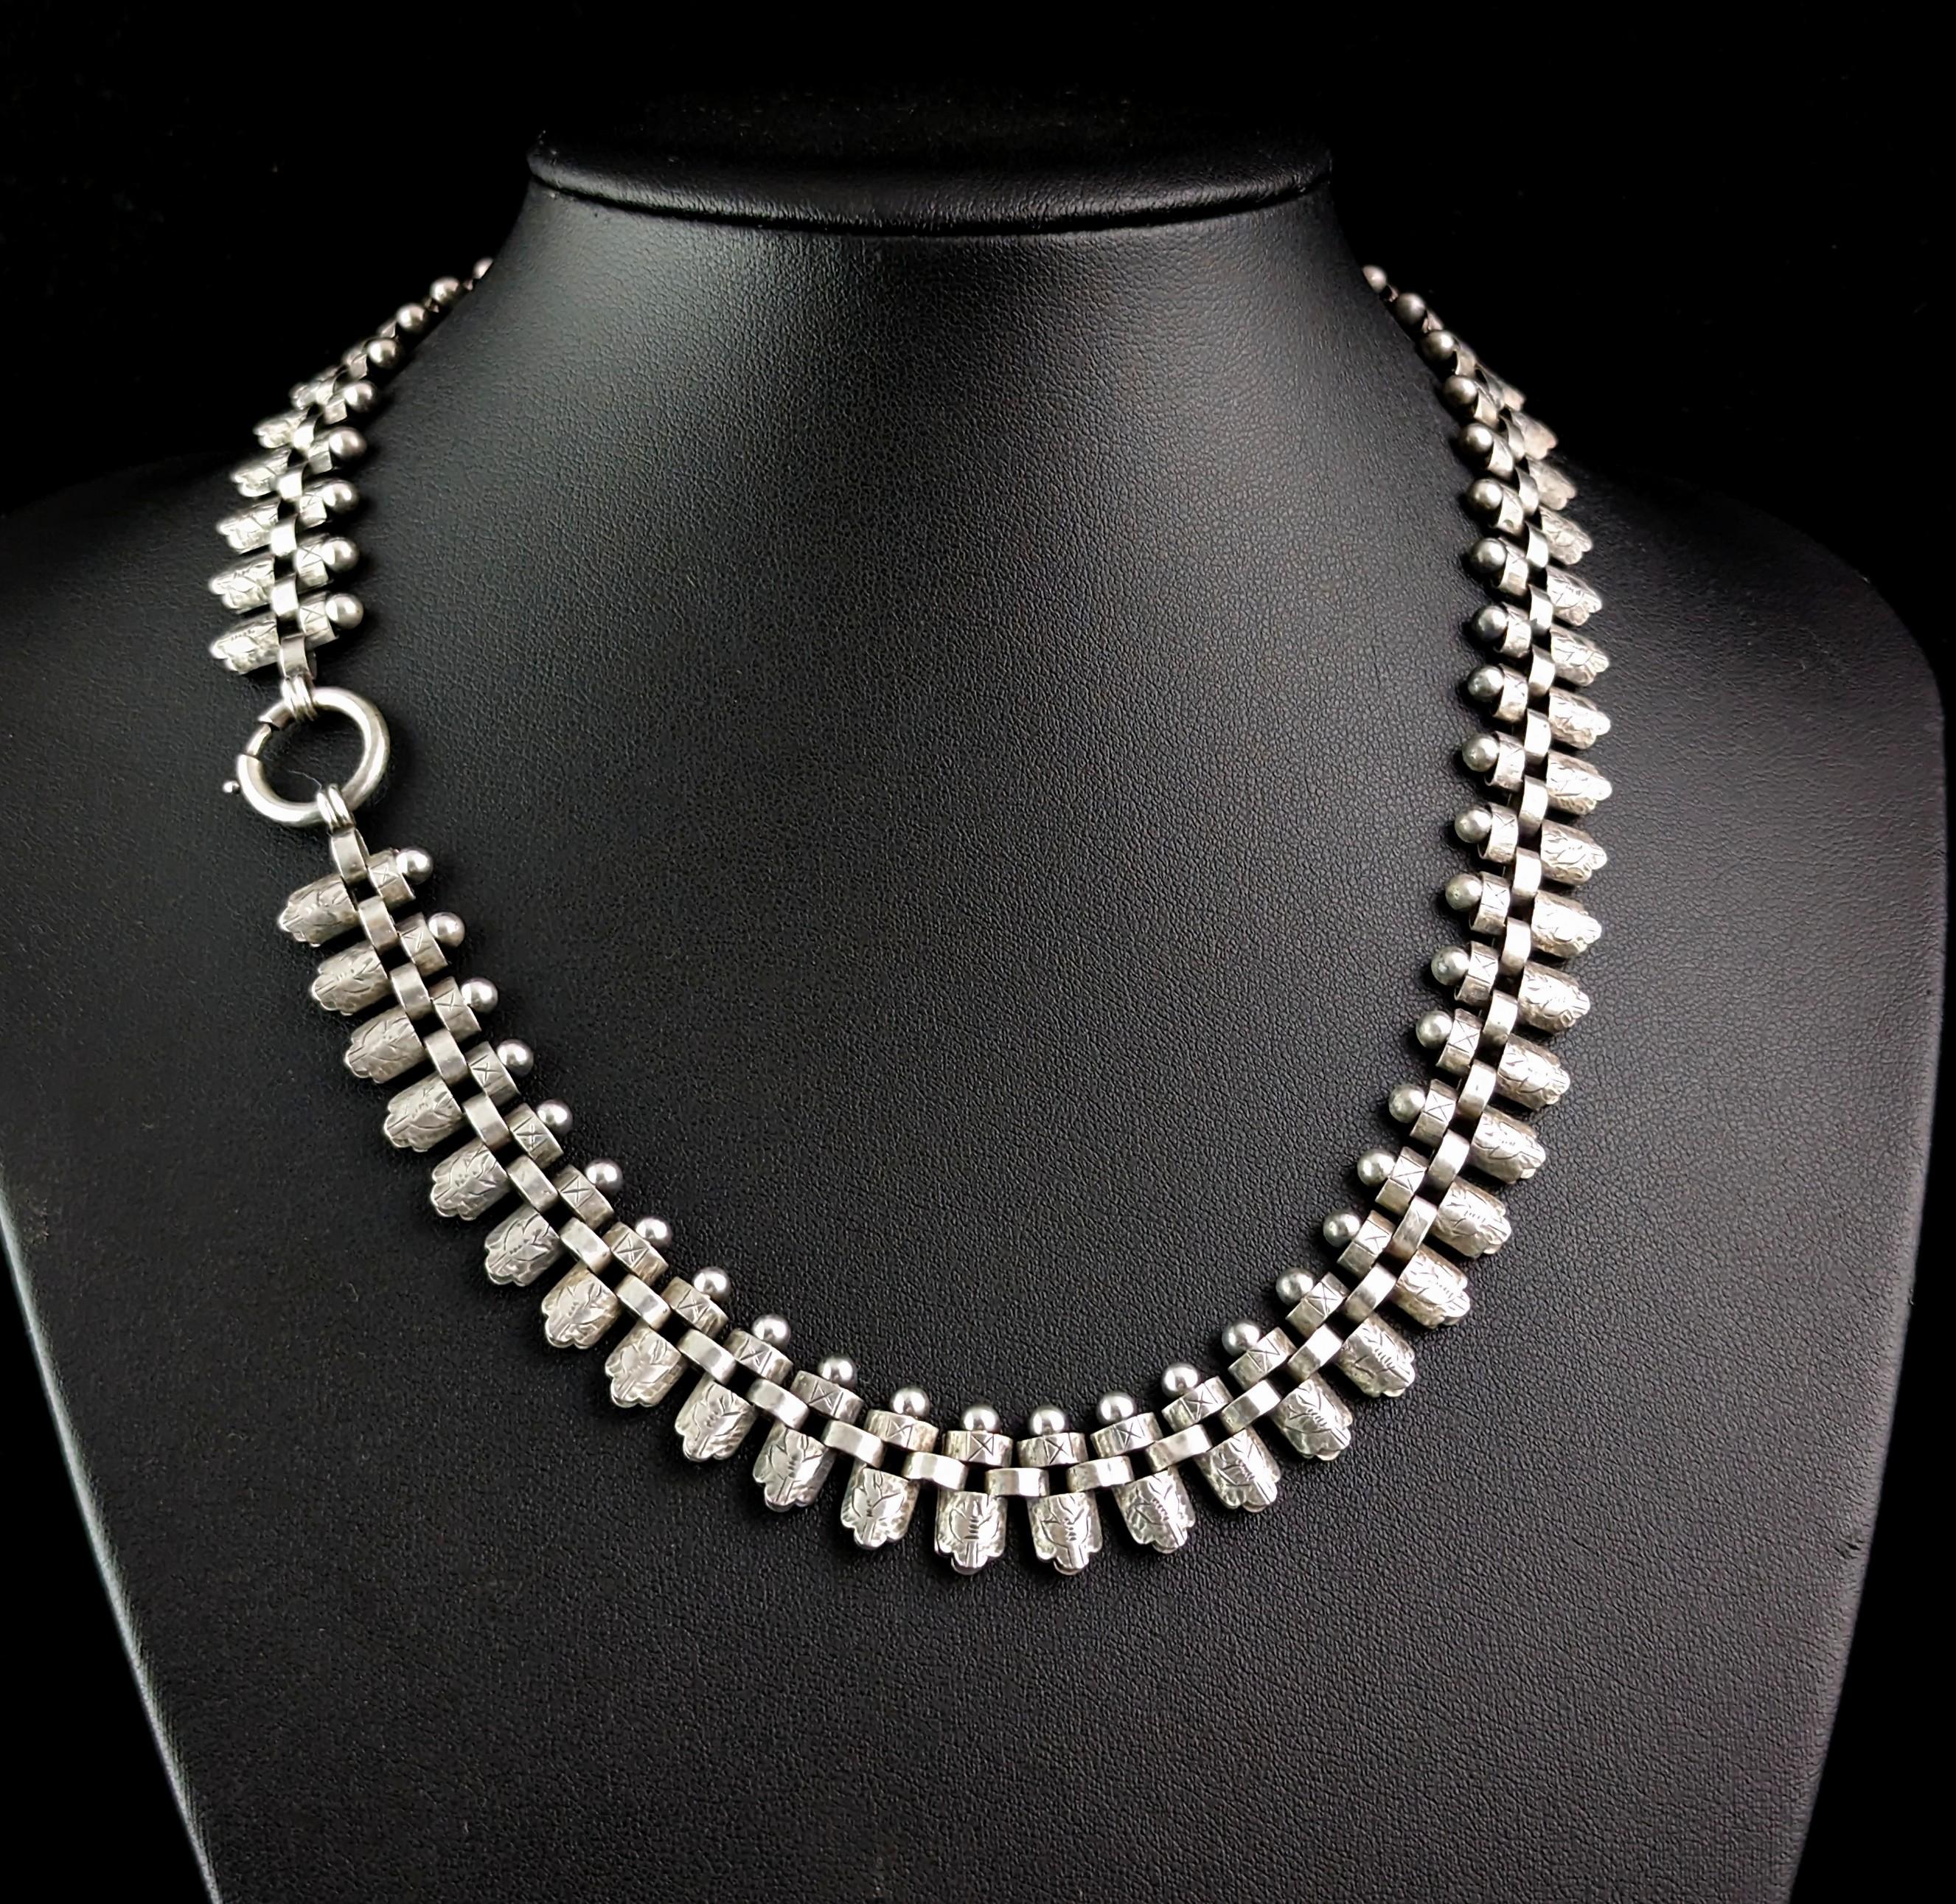 You can't help but be charmed by this elaborate antique, Victorian era sterling silver collar necklace.

This is one of the more pretty examples and there is so much detailing on this piece.

It has fancy engraved links interlocking with silver